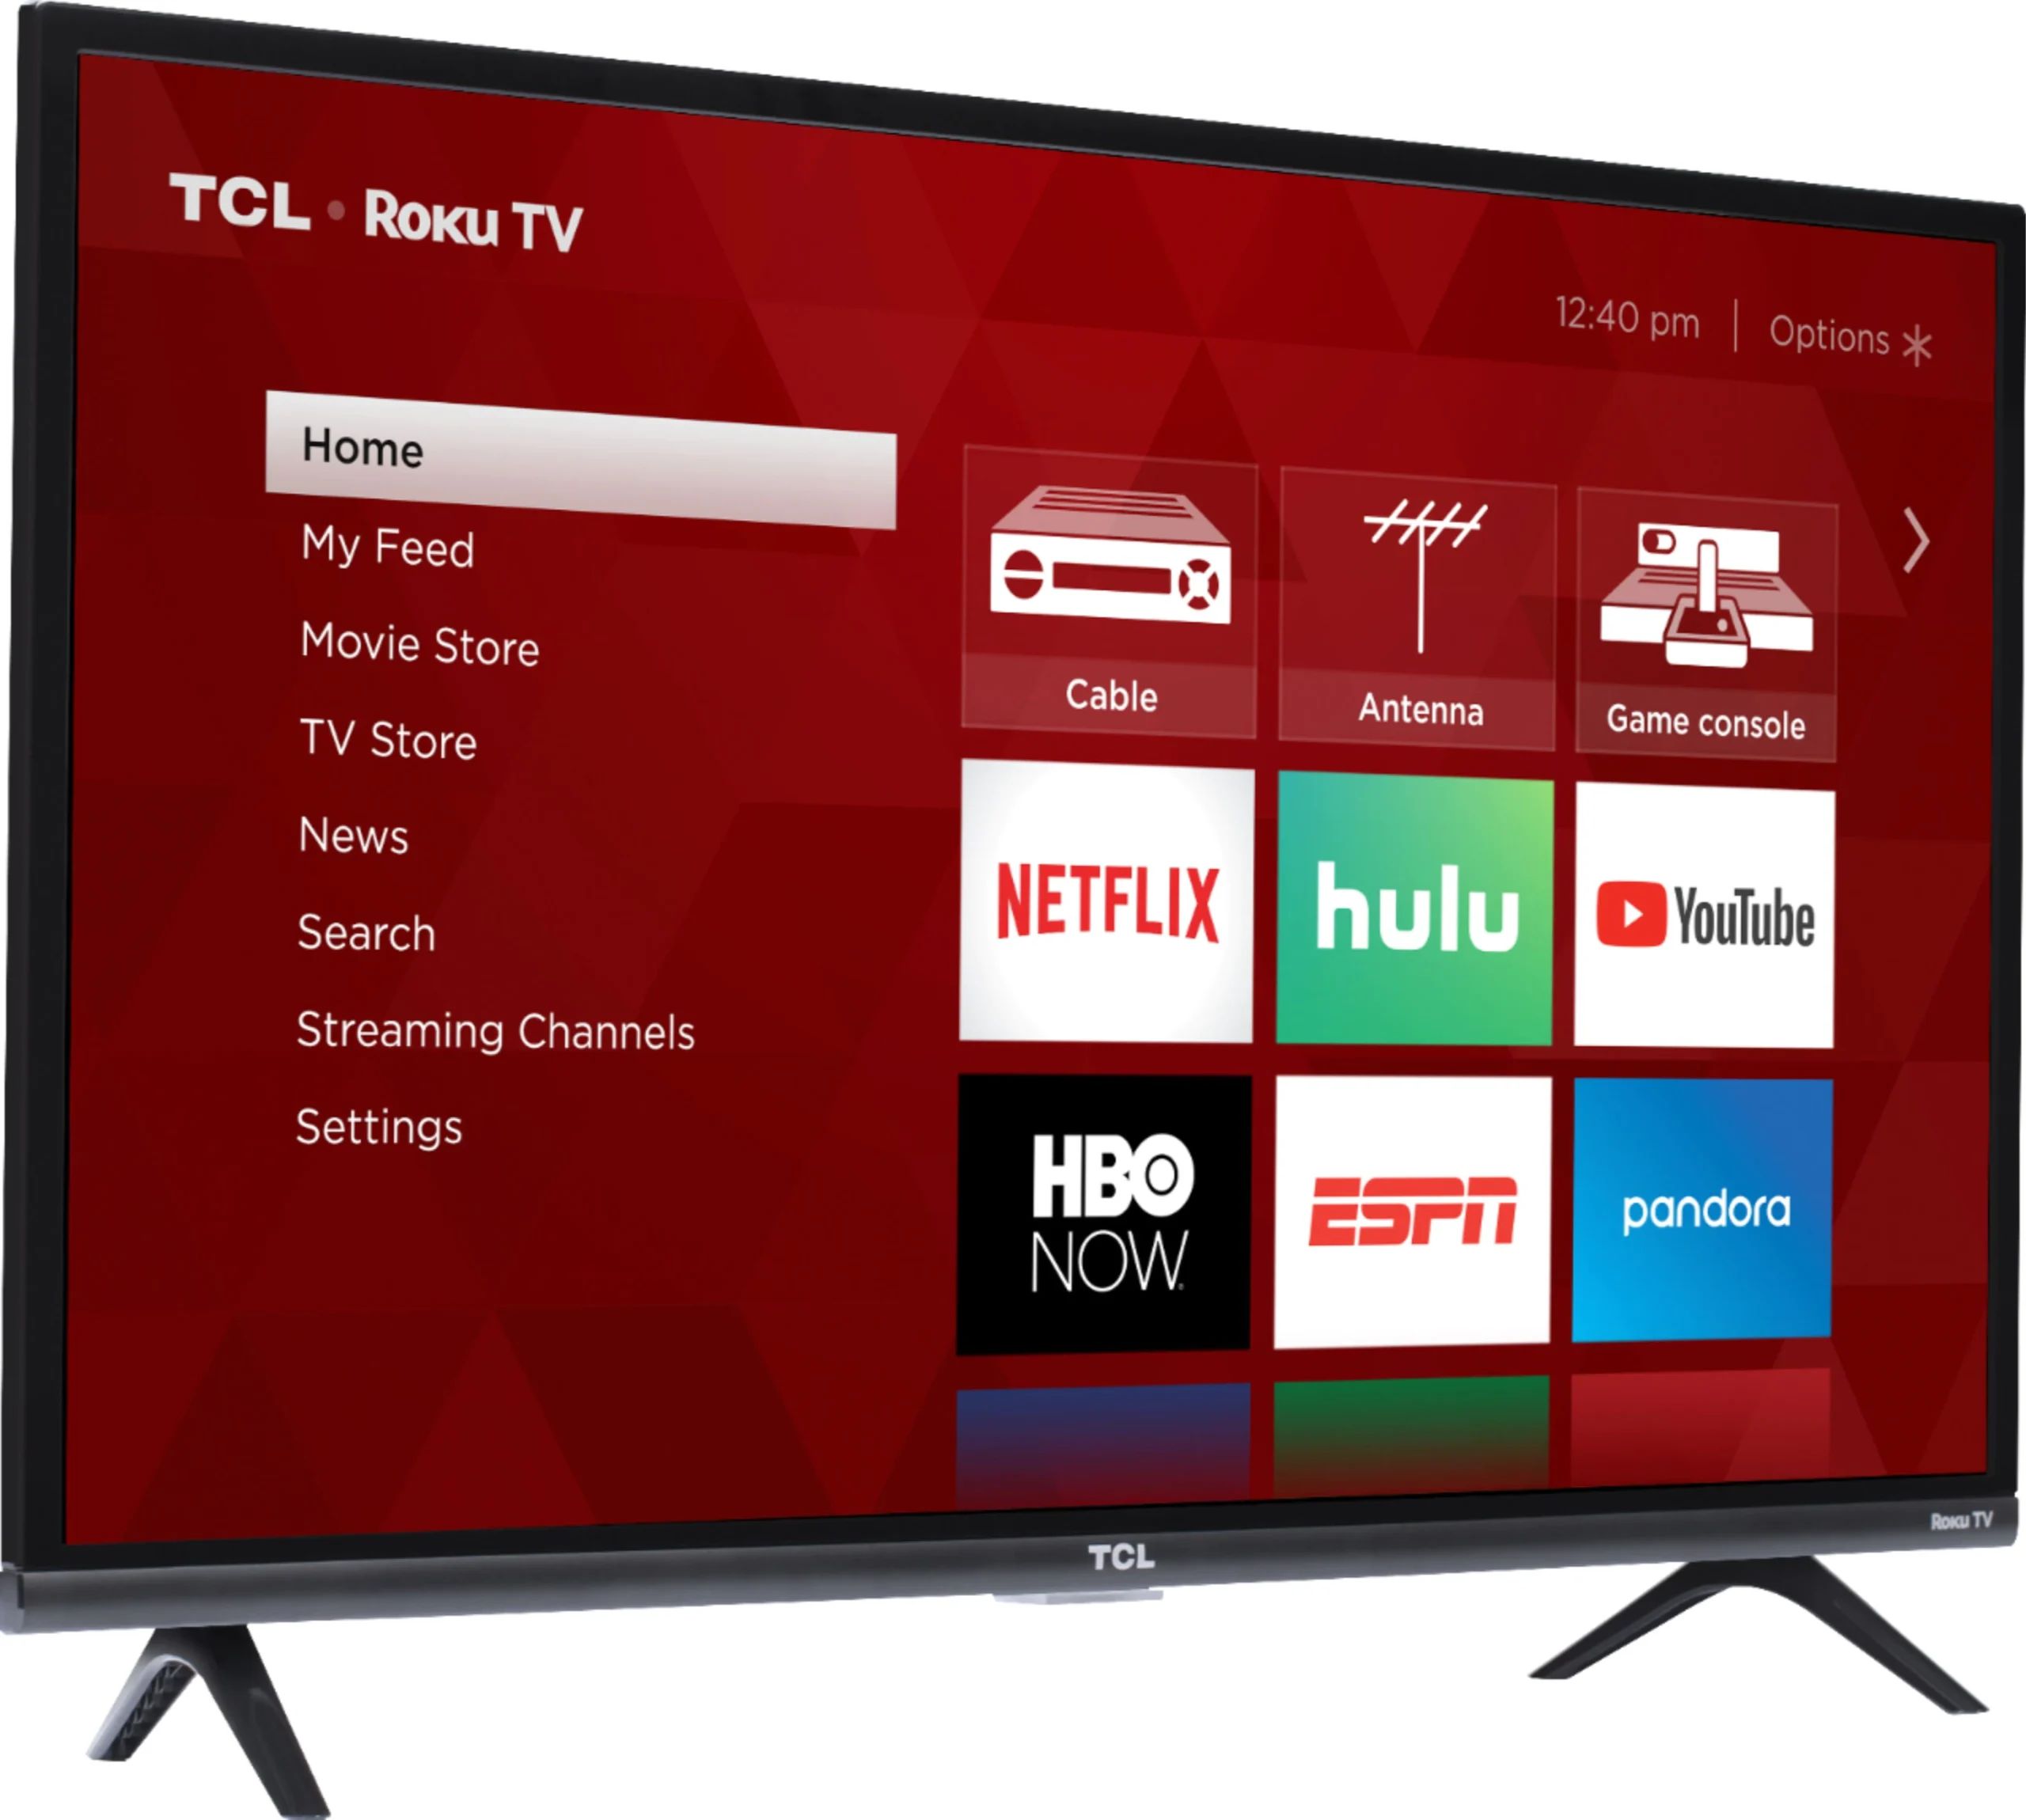 Where Is Power Button On Tcl Roku Tv